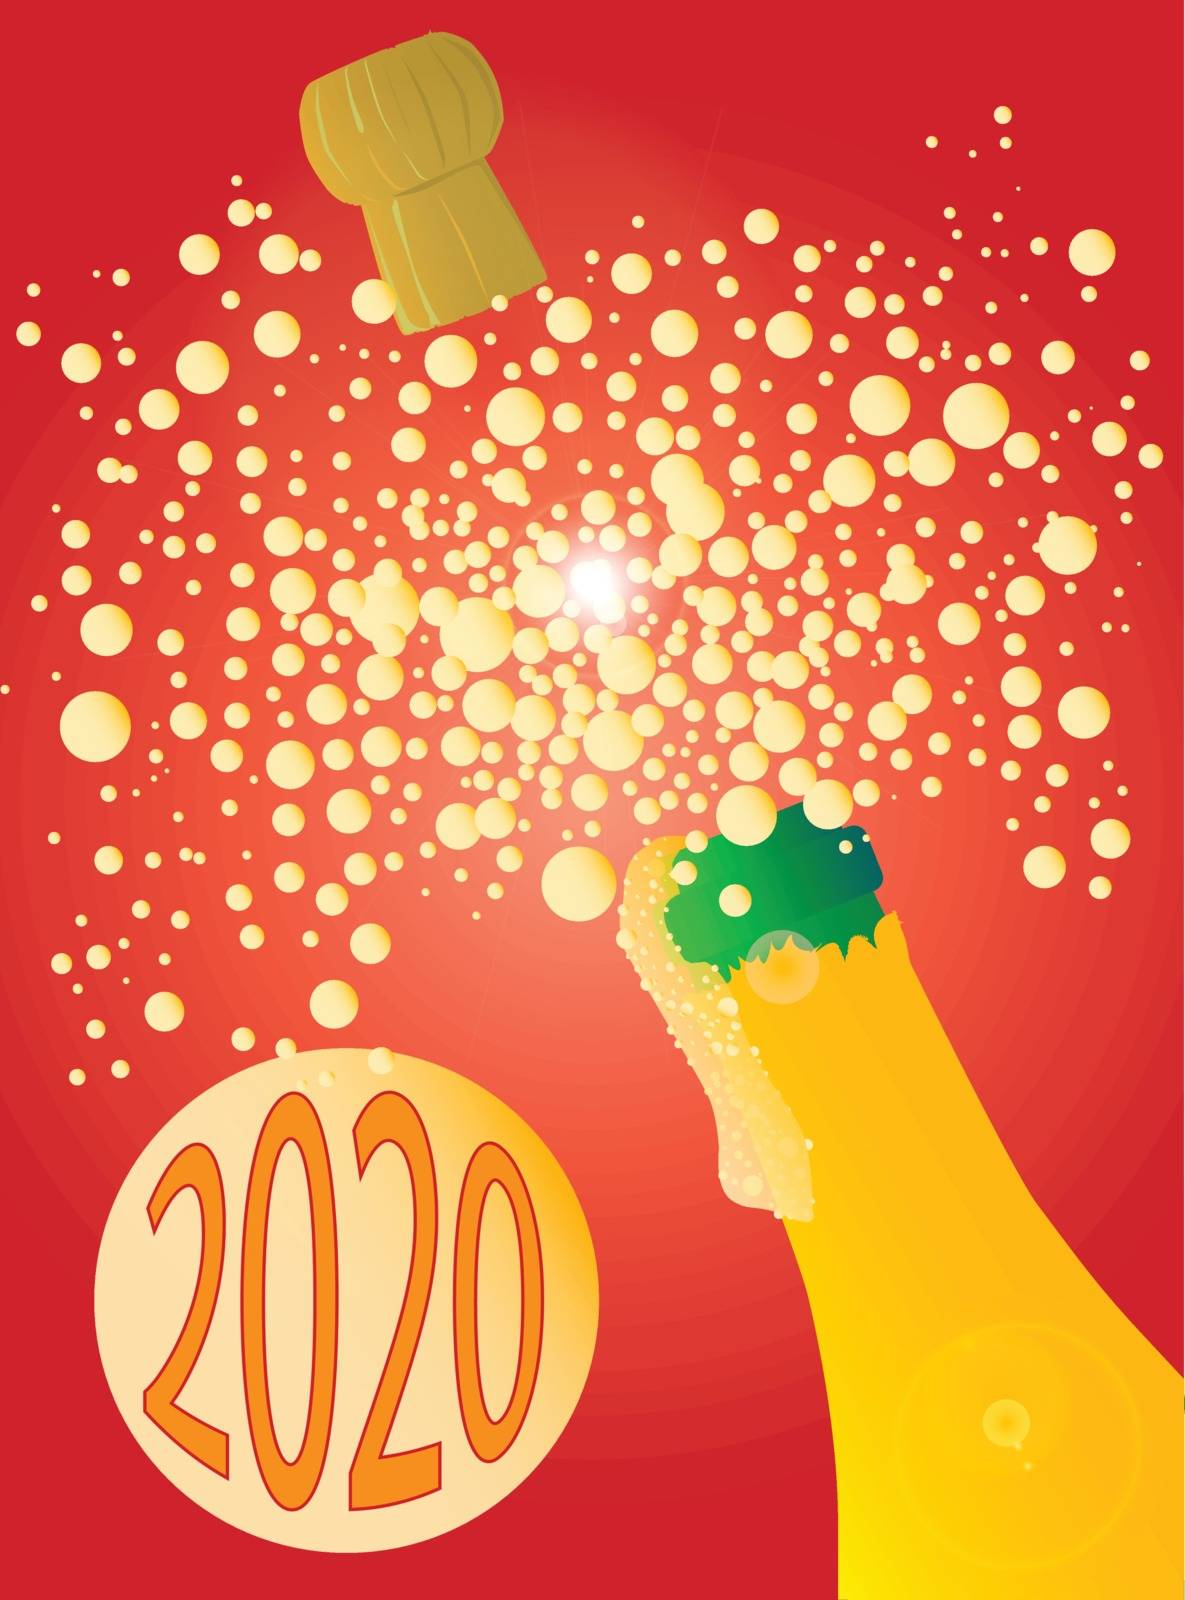 A New Year champagne bottle being opened with froth and bubbles with a large bubble exclaiming 2020